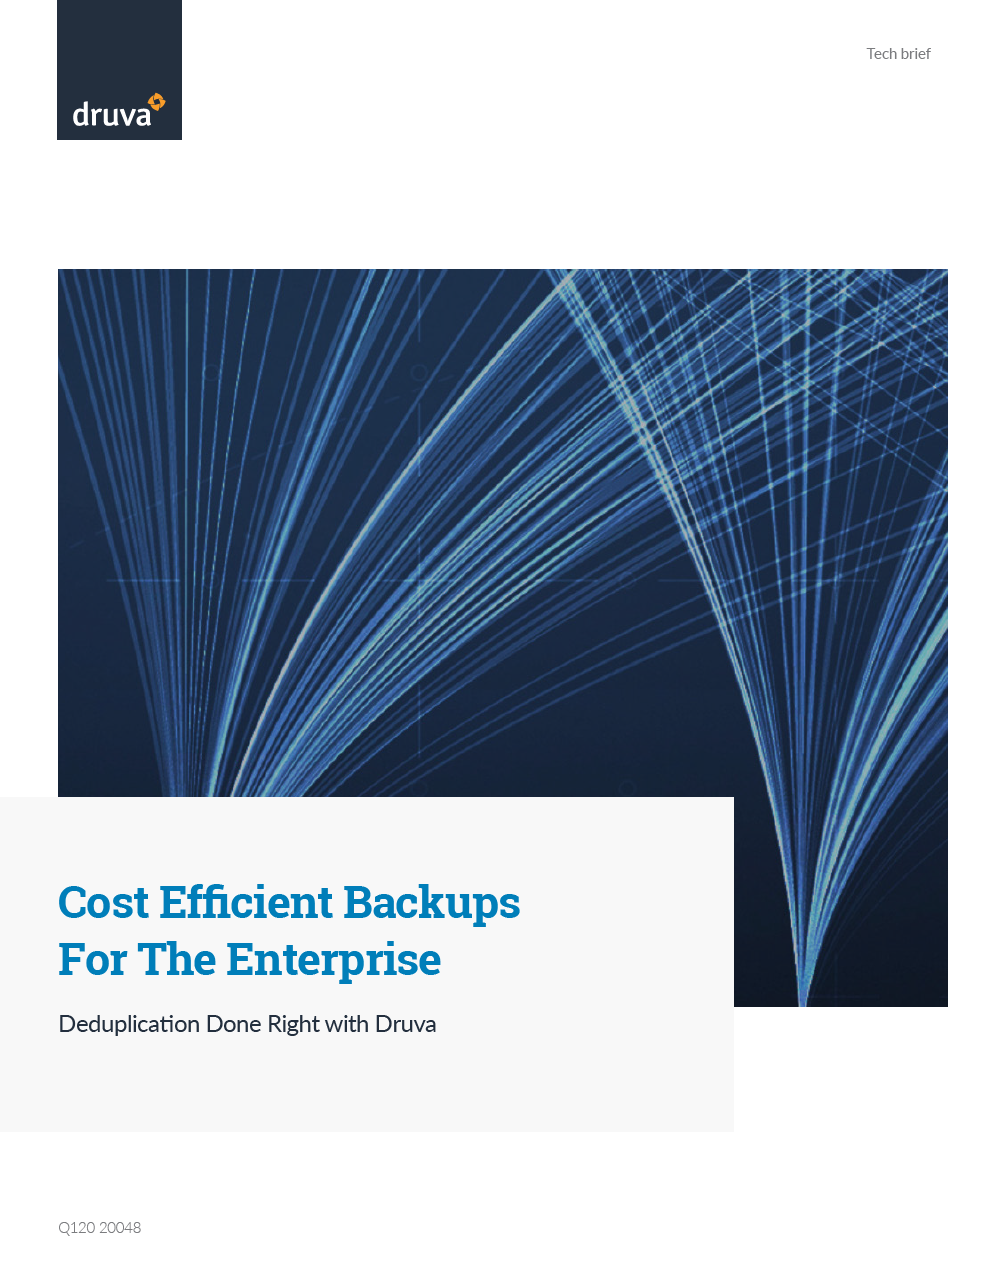 Cost efficient backups for the enterprise: Deduplication done right with Druva